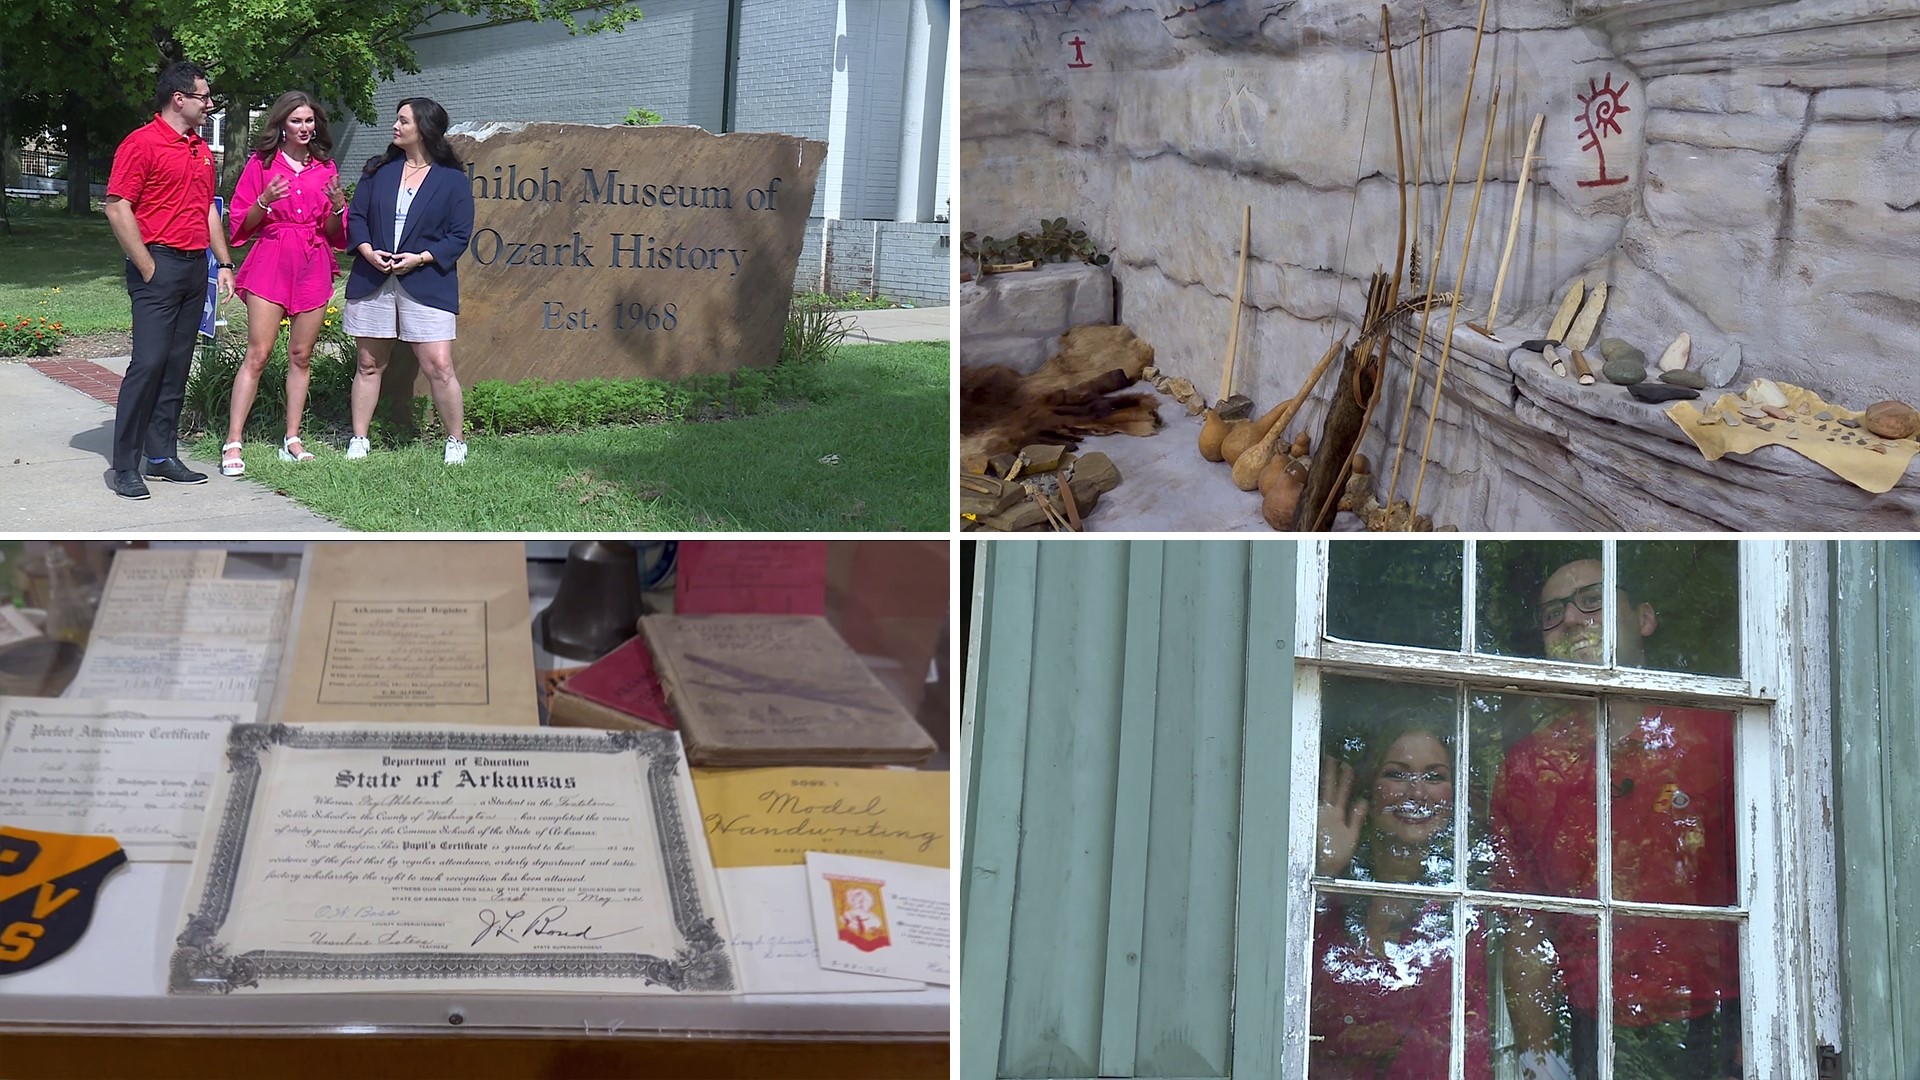 The 5NEWS Morning Crew took an educational trip to the Shiloh Museum of Ozark History in this week's Around the Corner.